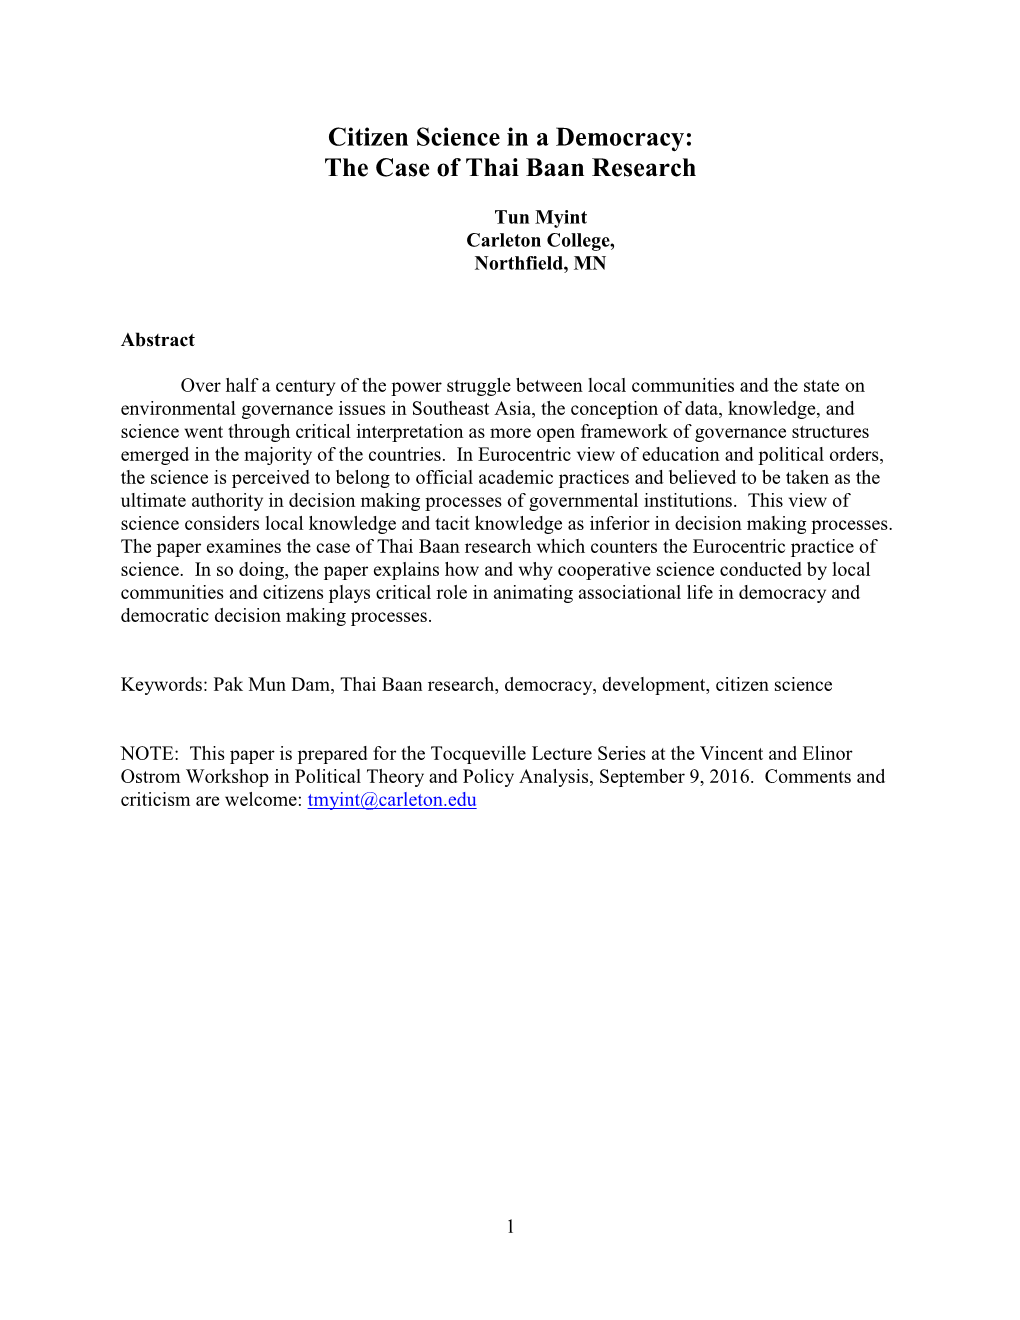 The Case of Thai Baan Research